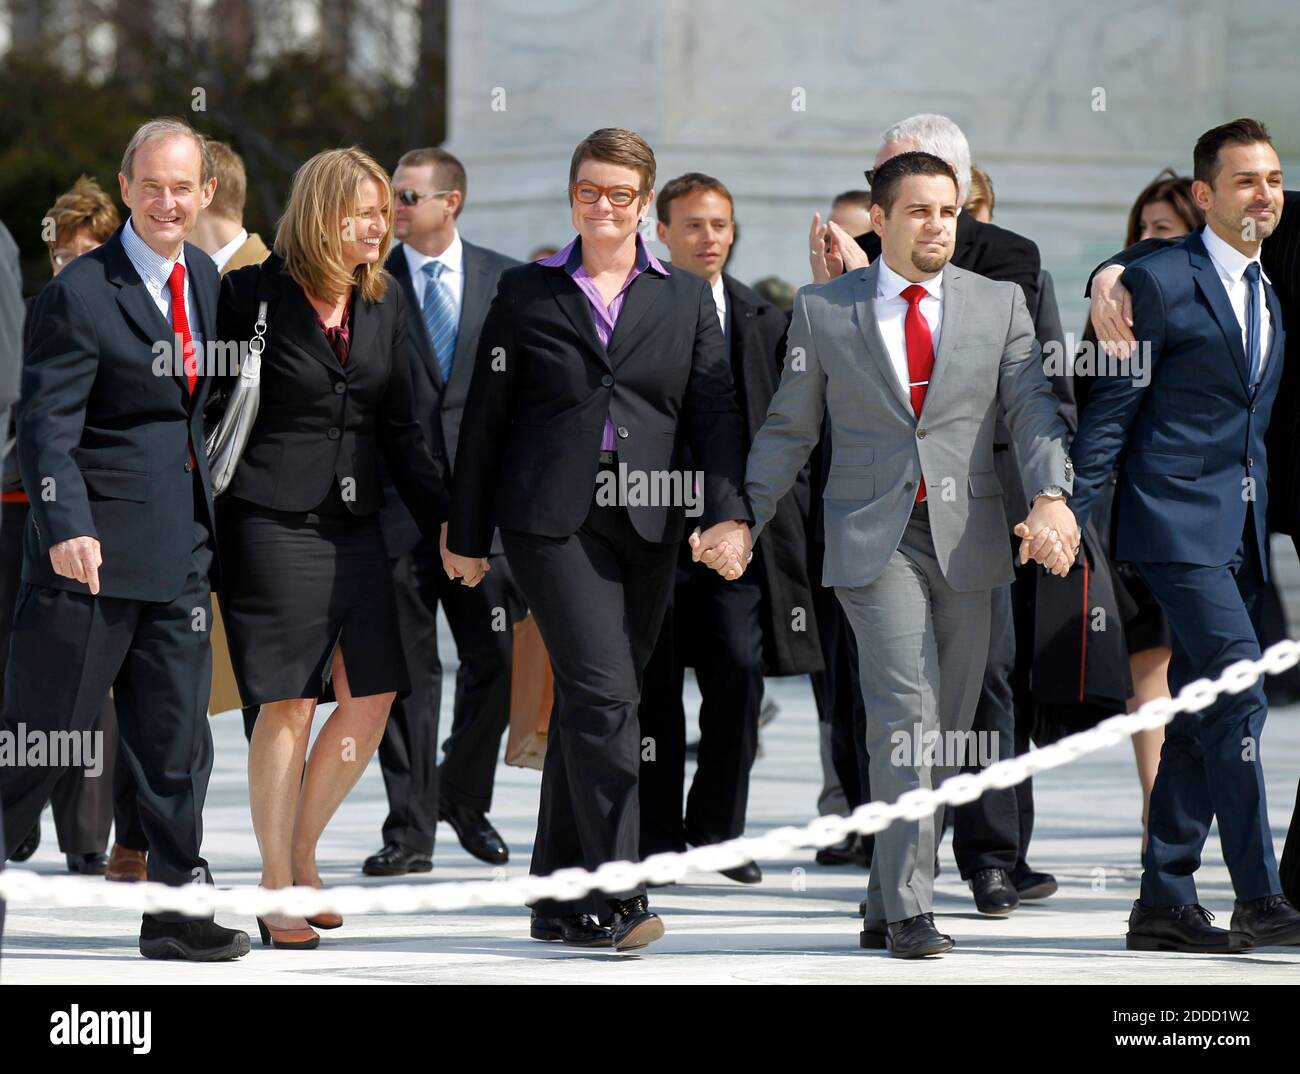 NO FILM, NO VIDEO, NO TV, NO DOCUMENTARY - Attorneys David Bois (left) walks out of the U.S. Supreme Court with plaintiffs, from left, Sandy Stier, Kris Perry, Jeff Zarillo, and Paul Katami, after California's Proposition 8 was argued before the Court in Washington, D.C., Teusday, March 26, 2013. Photo by Molly Riley/MCT/ABACAPRESS.COM Stock Photo